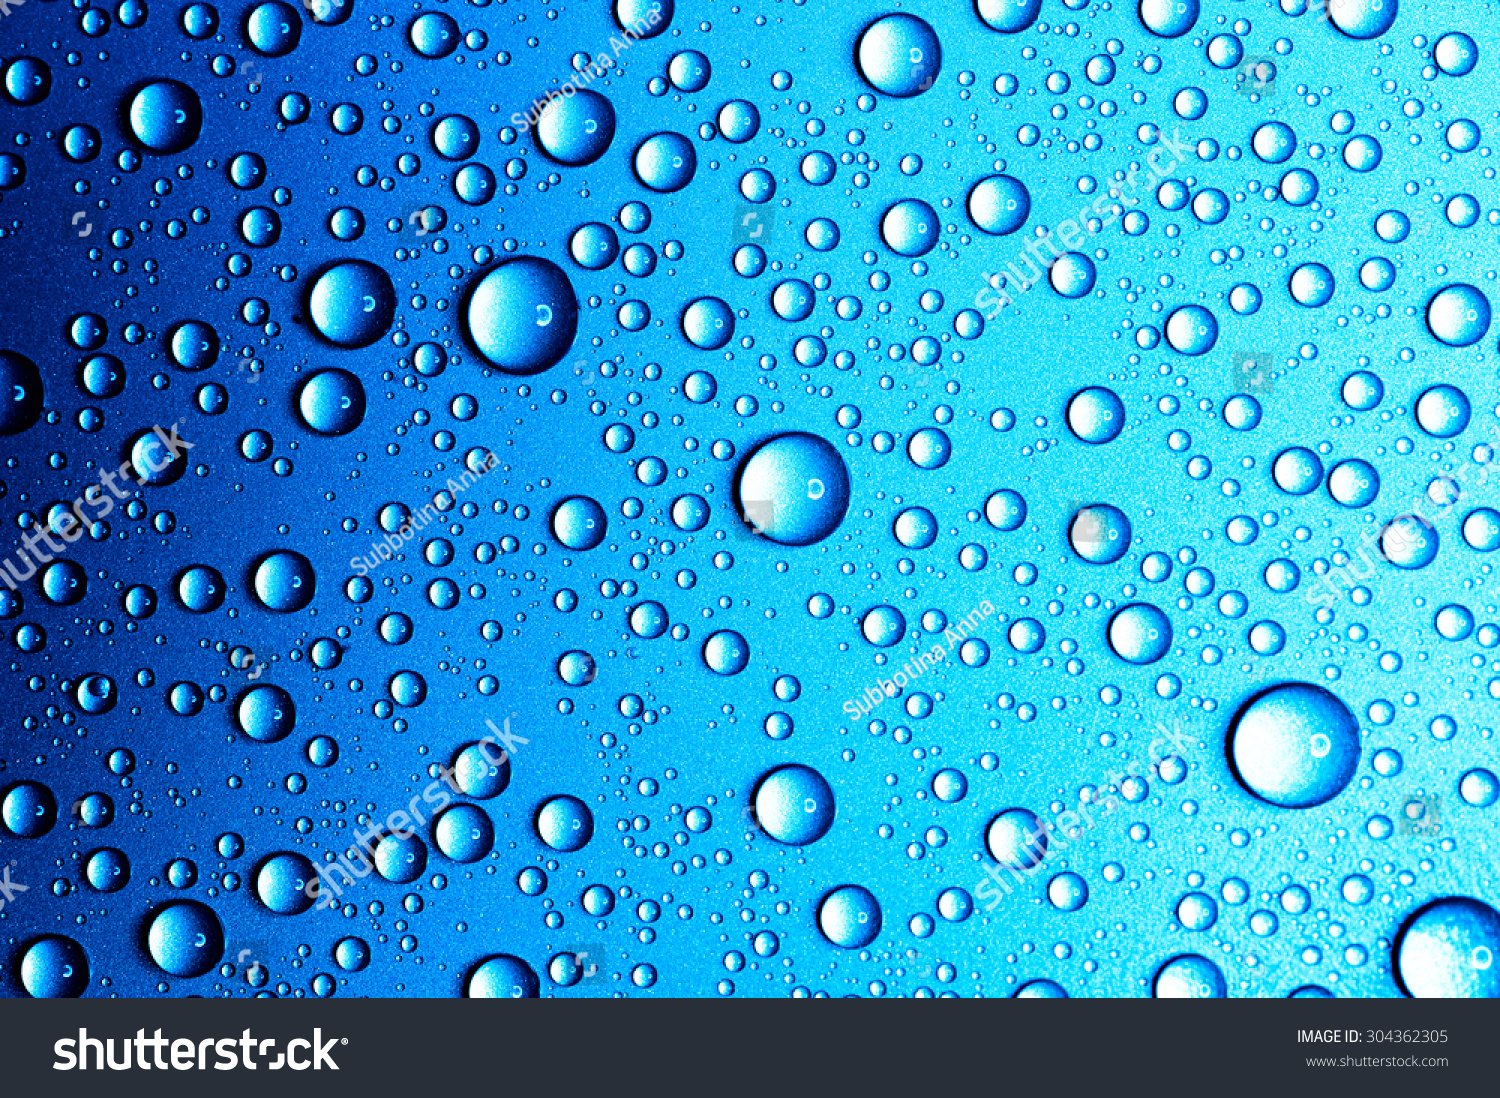 Water Drops Close Up. Abstract Blue Background Of Waterdrops, Droplets ...